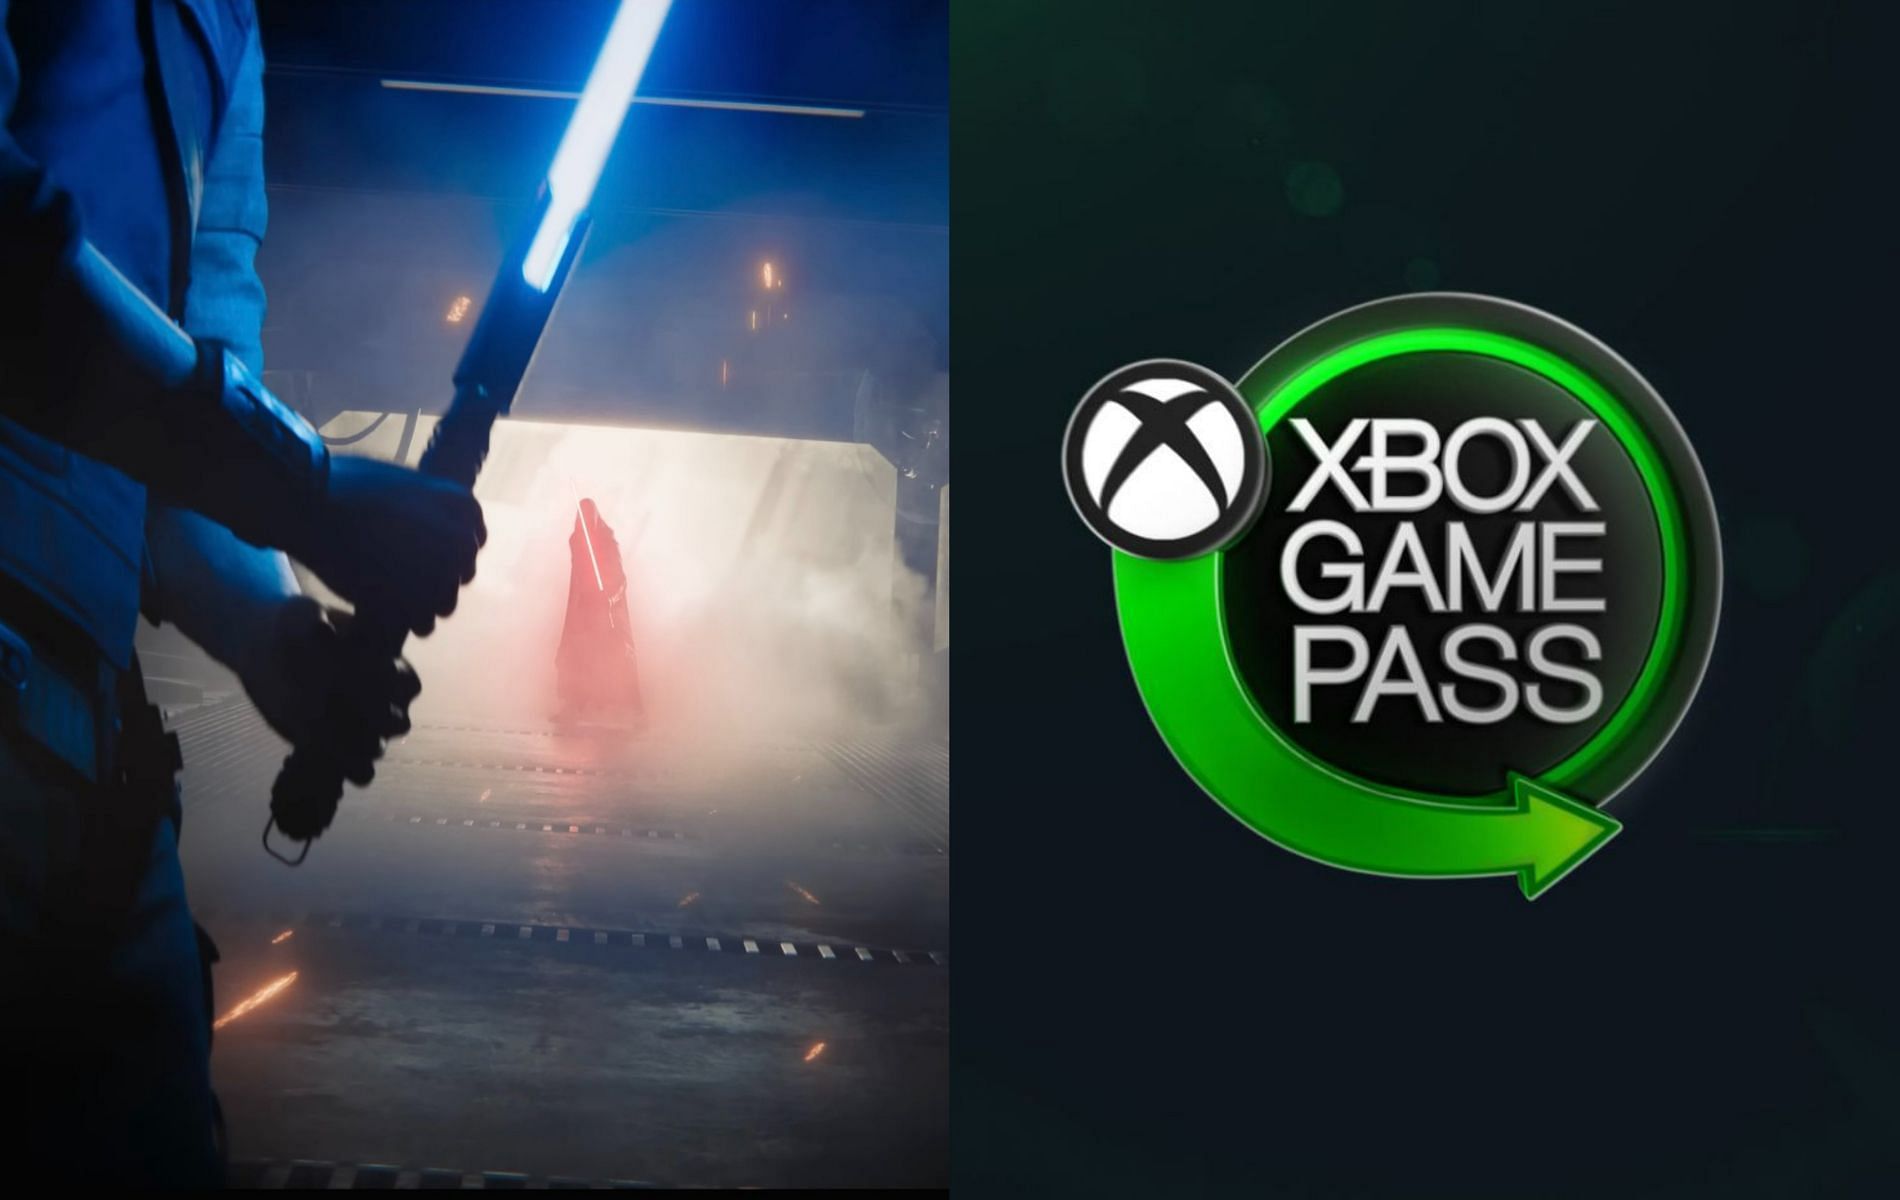 Star Wars Jedi: Survivor will not have a day-one Game Pass Launch (Images via Respawn and Microsoft)